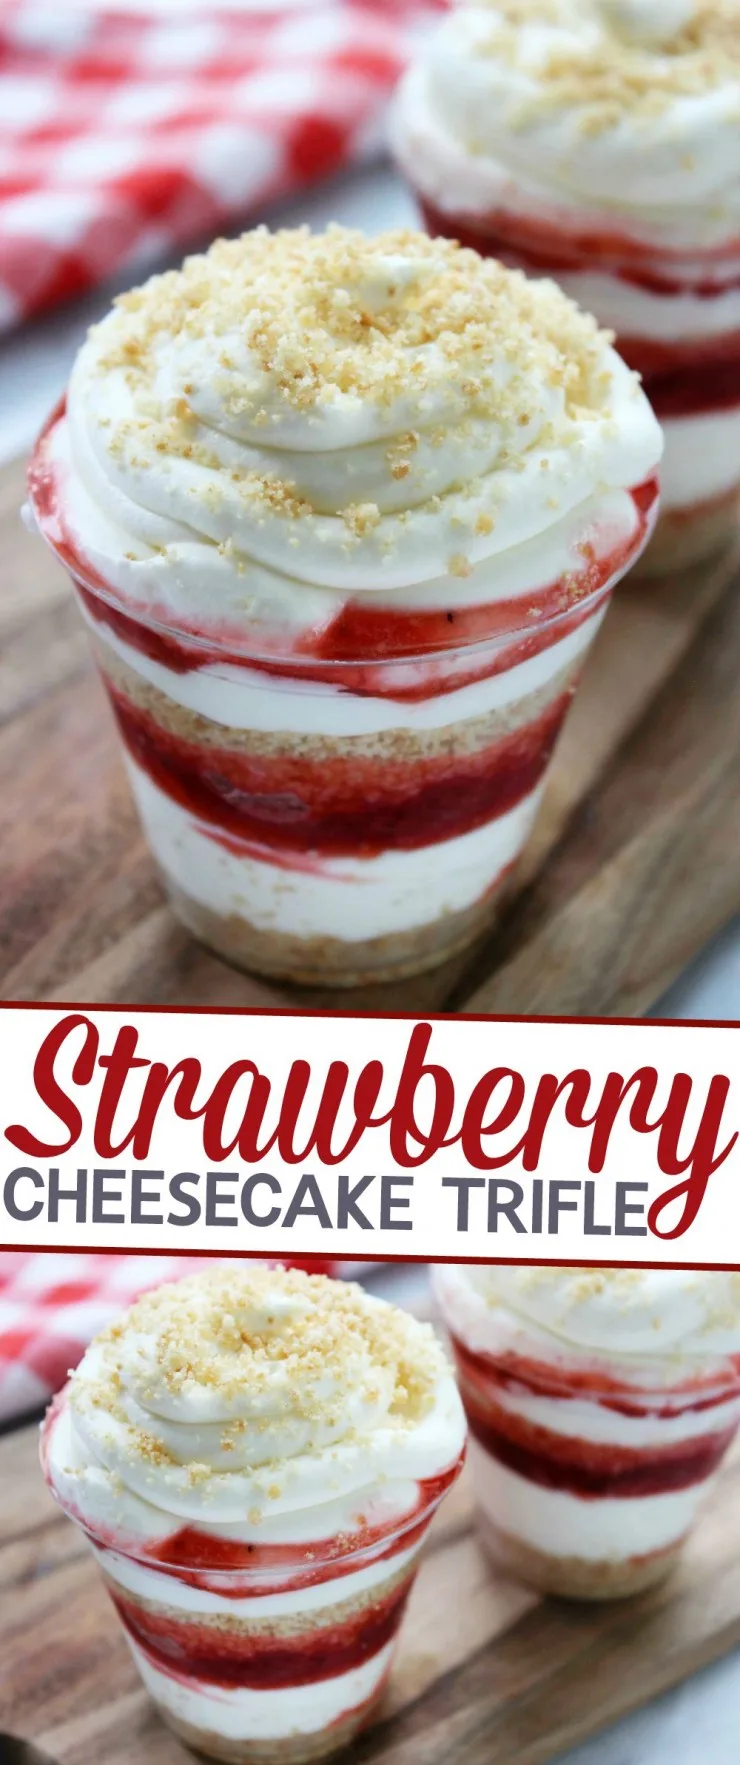 This Strawberry Cheesecake Trifle is an easy, no fuss, summer dessert perfect for serving at summer parties!